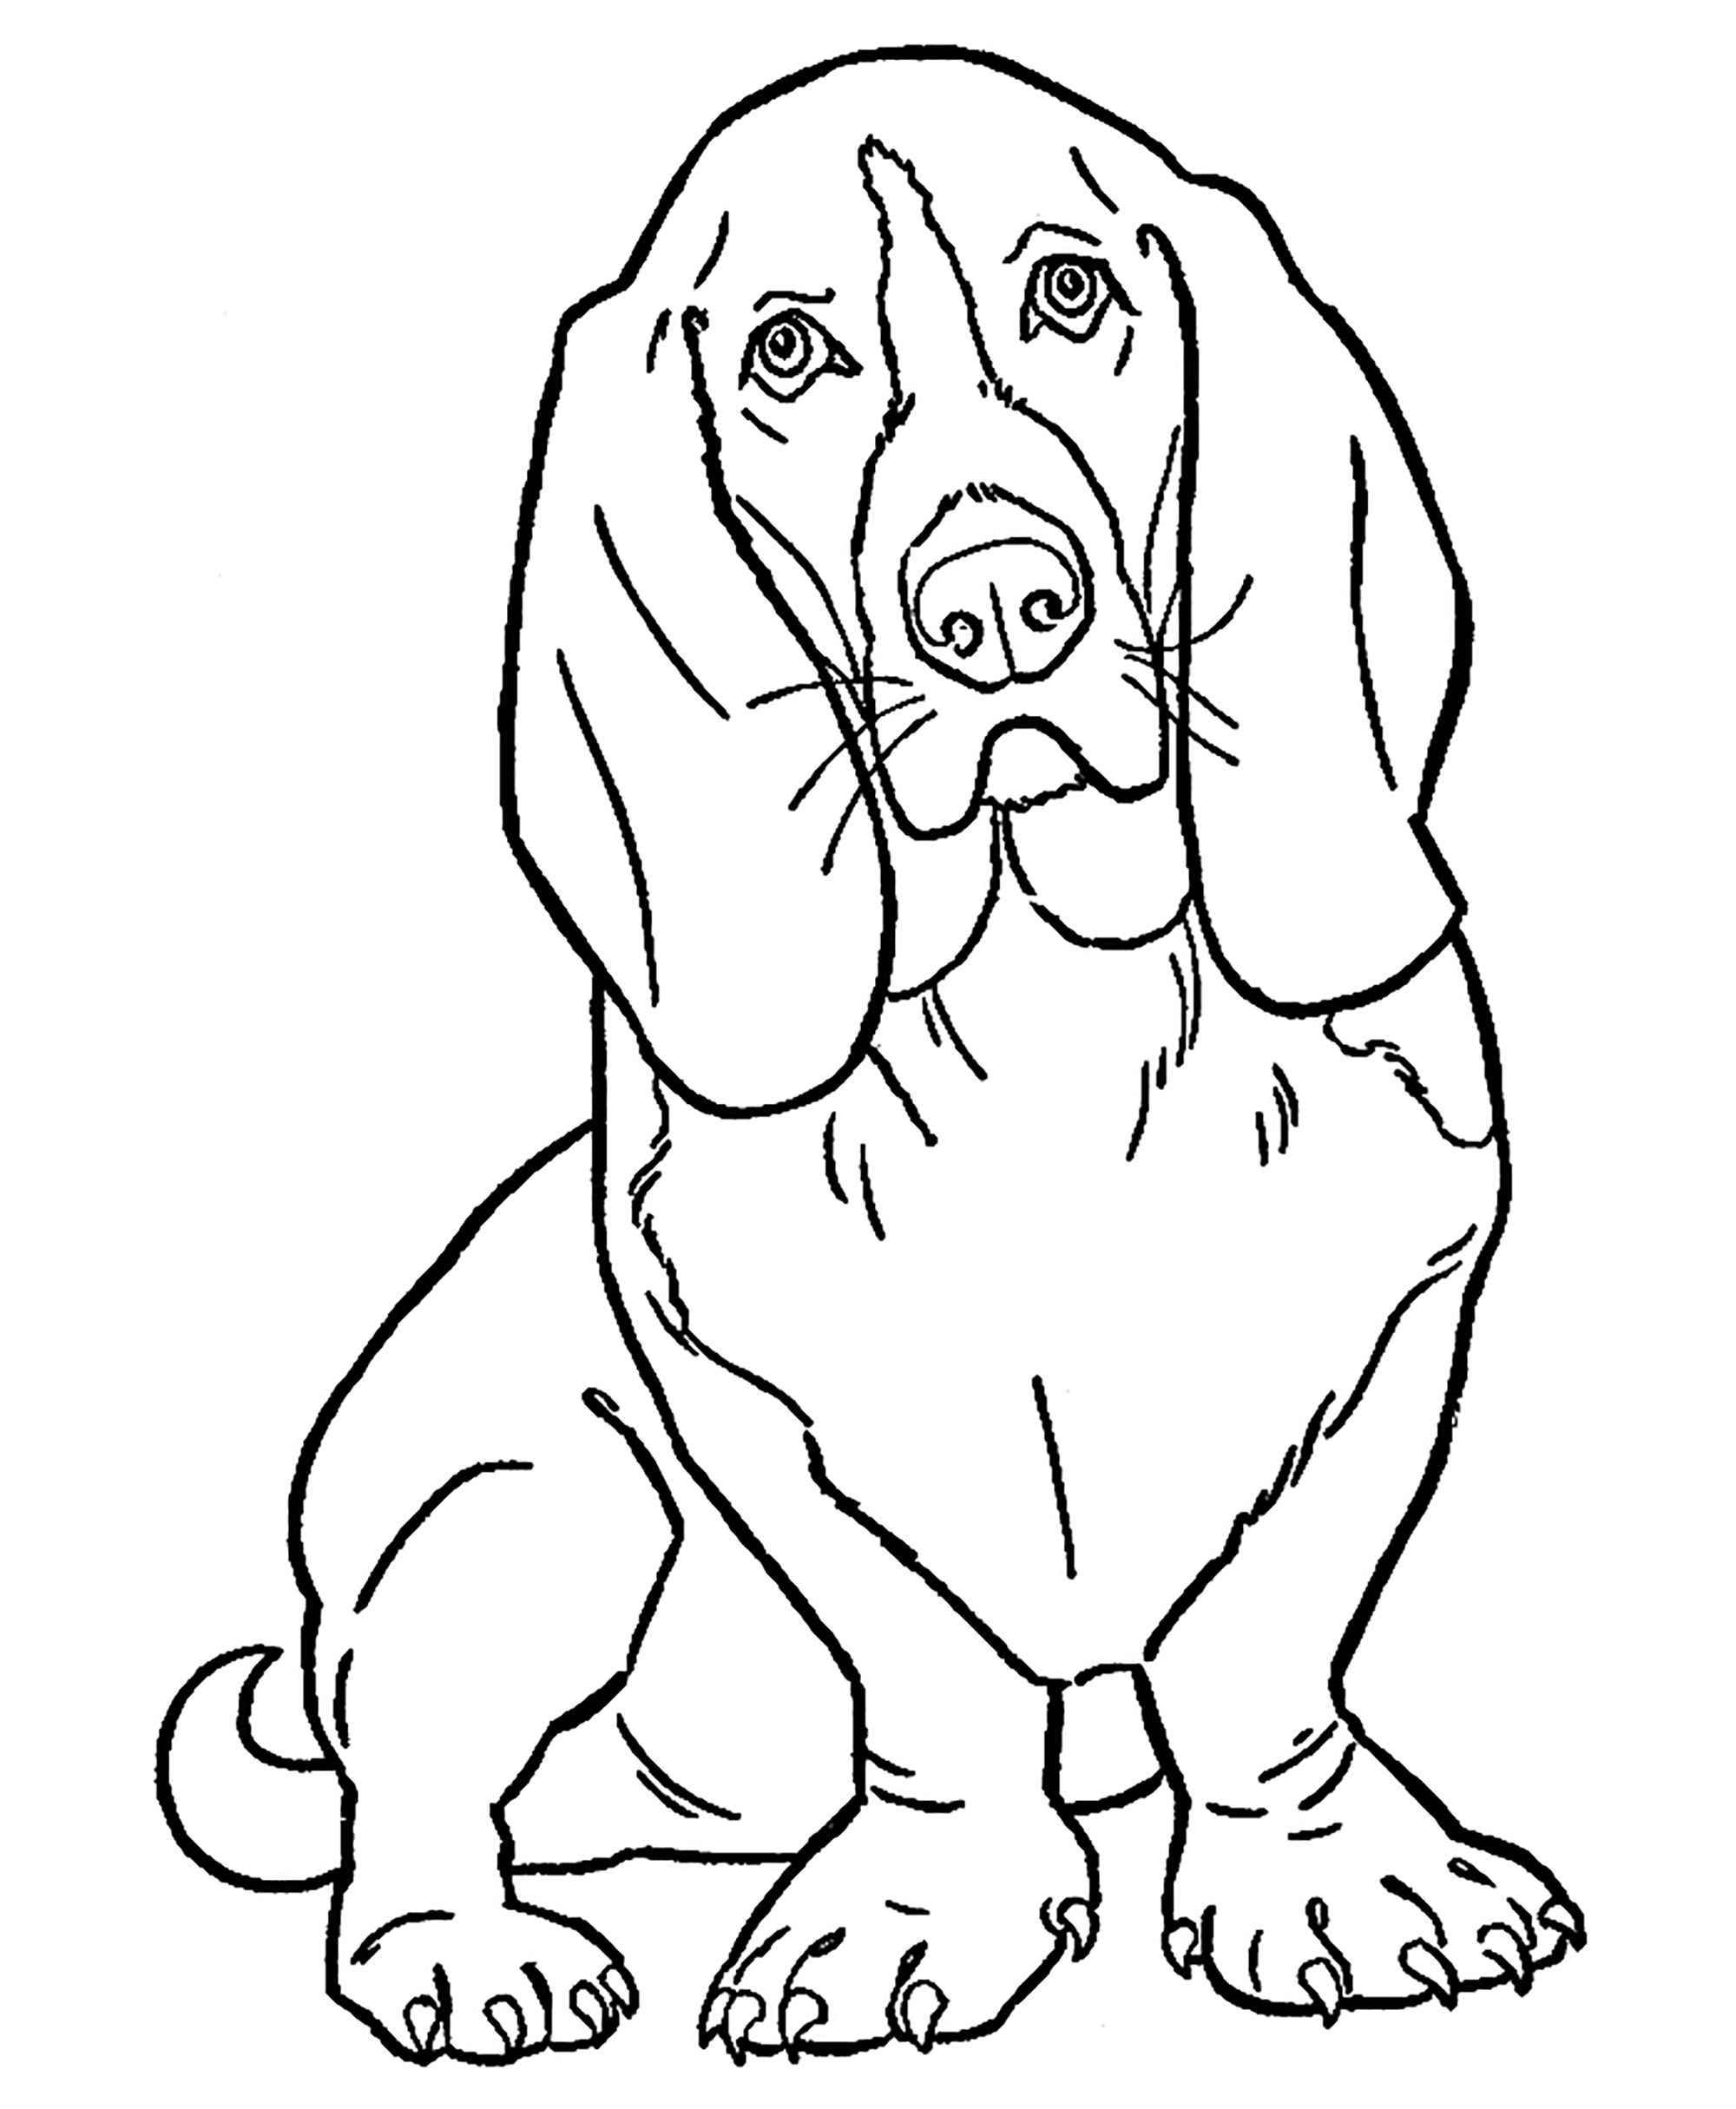 Dog drawing to print and color